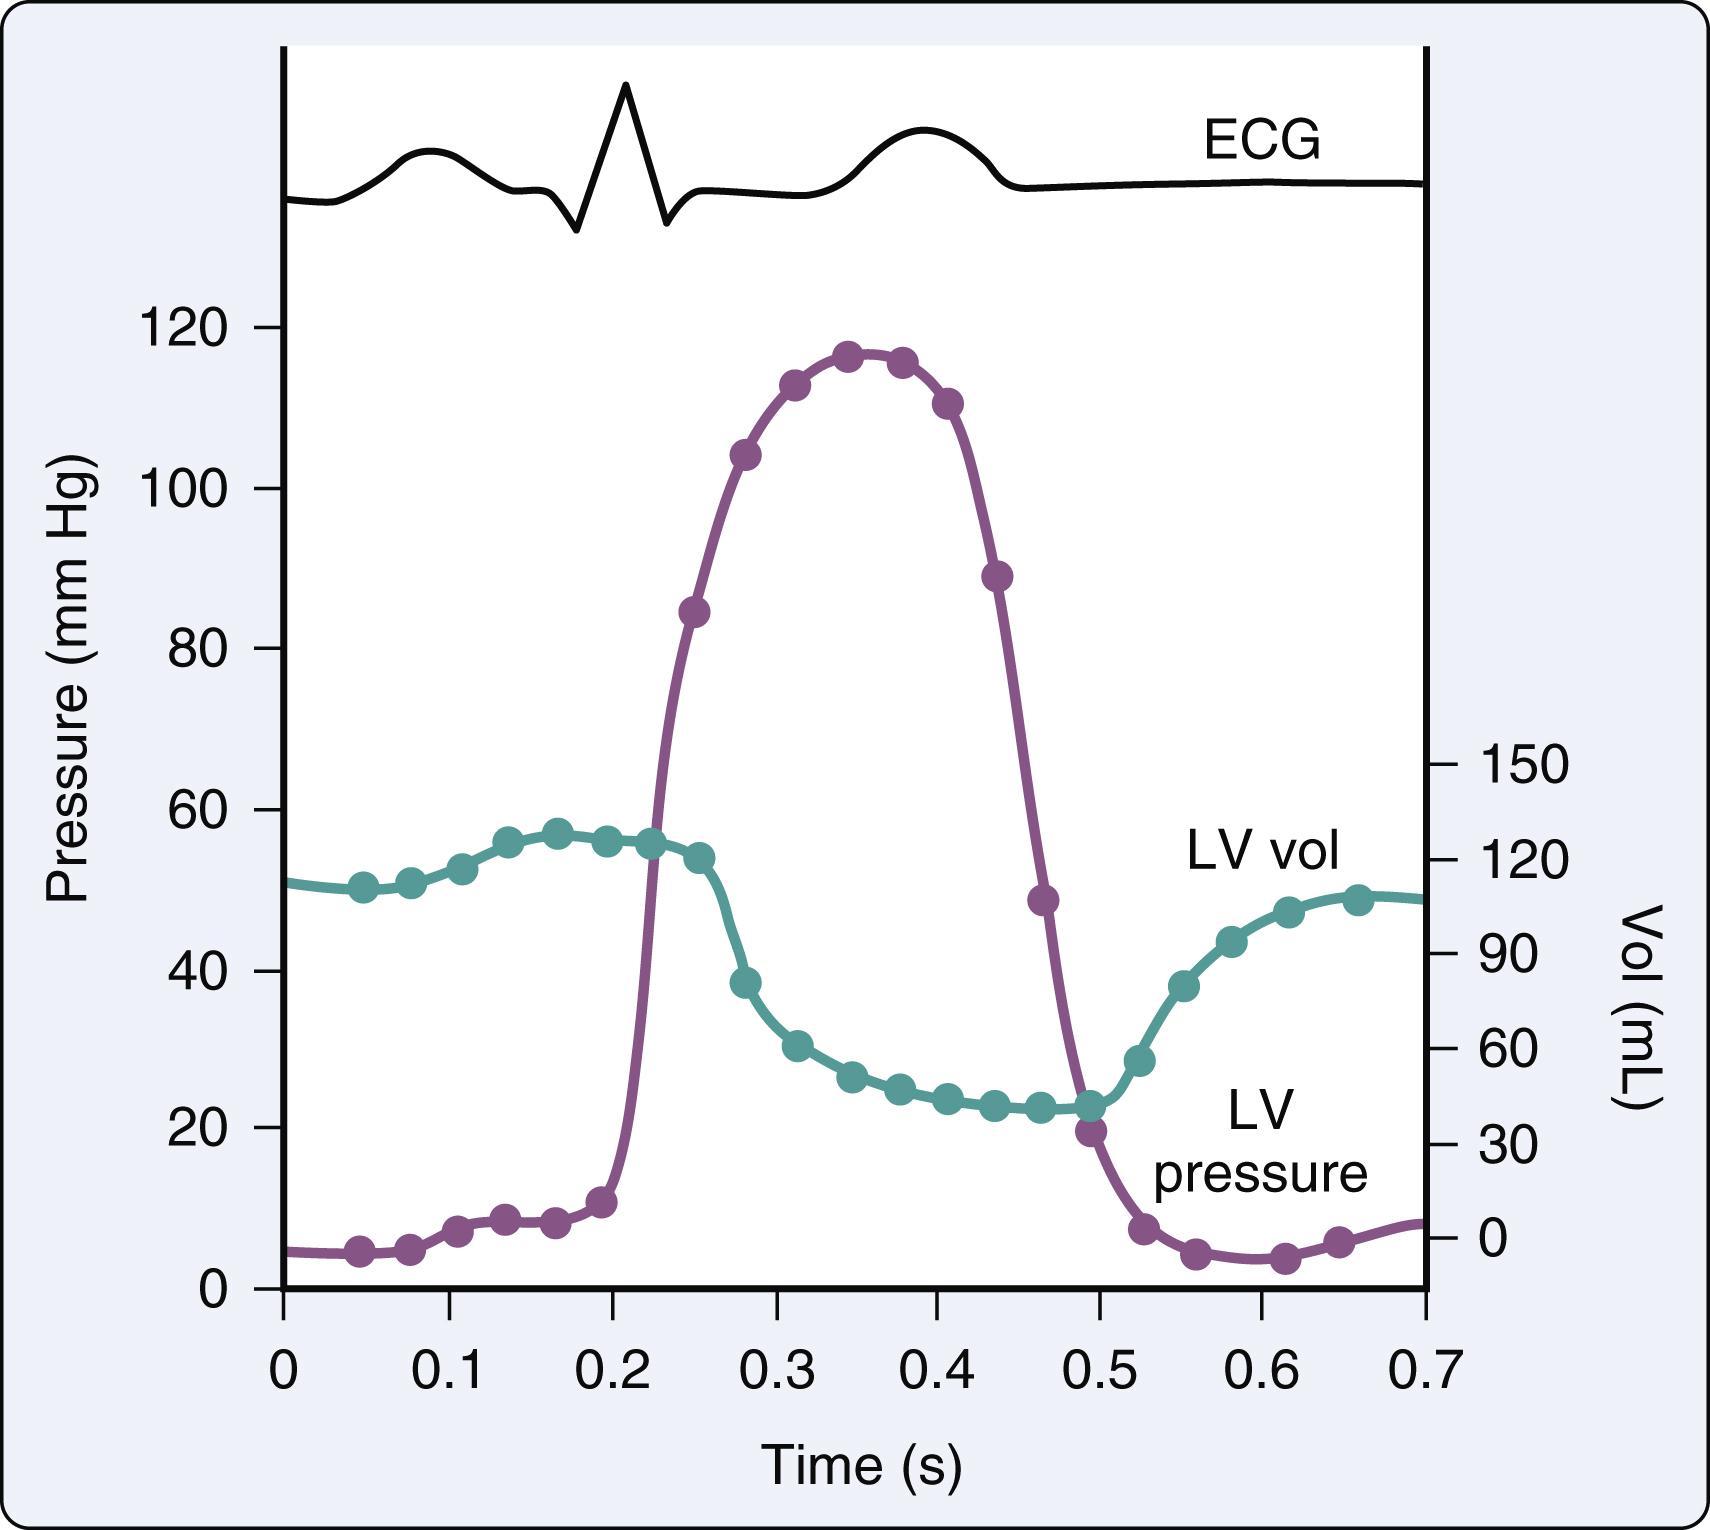 Figure 15.1, Simultaneous left ventricular (LV) volume and pressure during one cardiac cycle. ECG , Electrocardiogram.